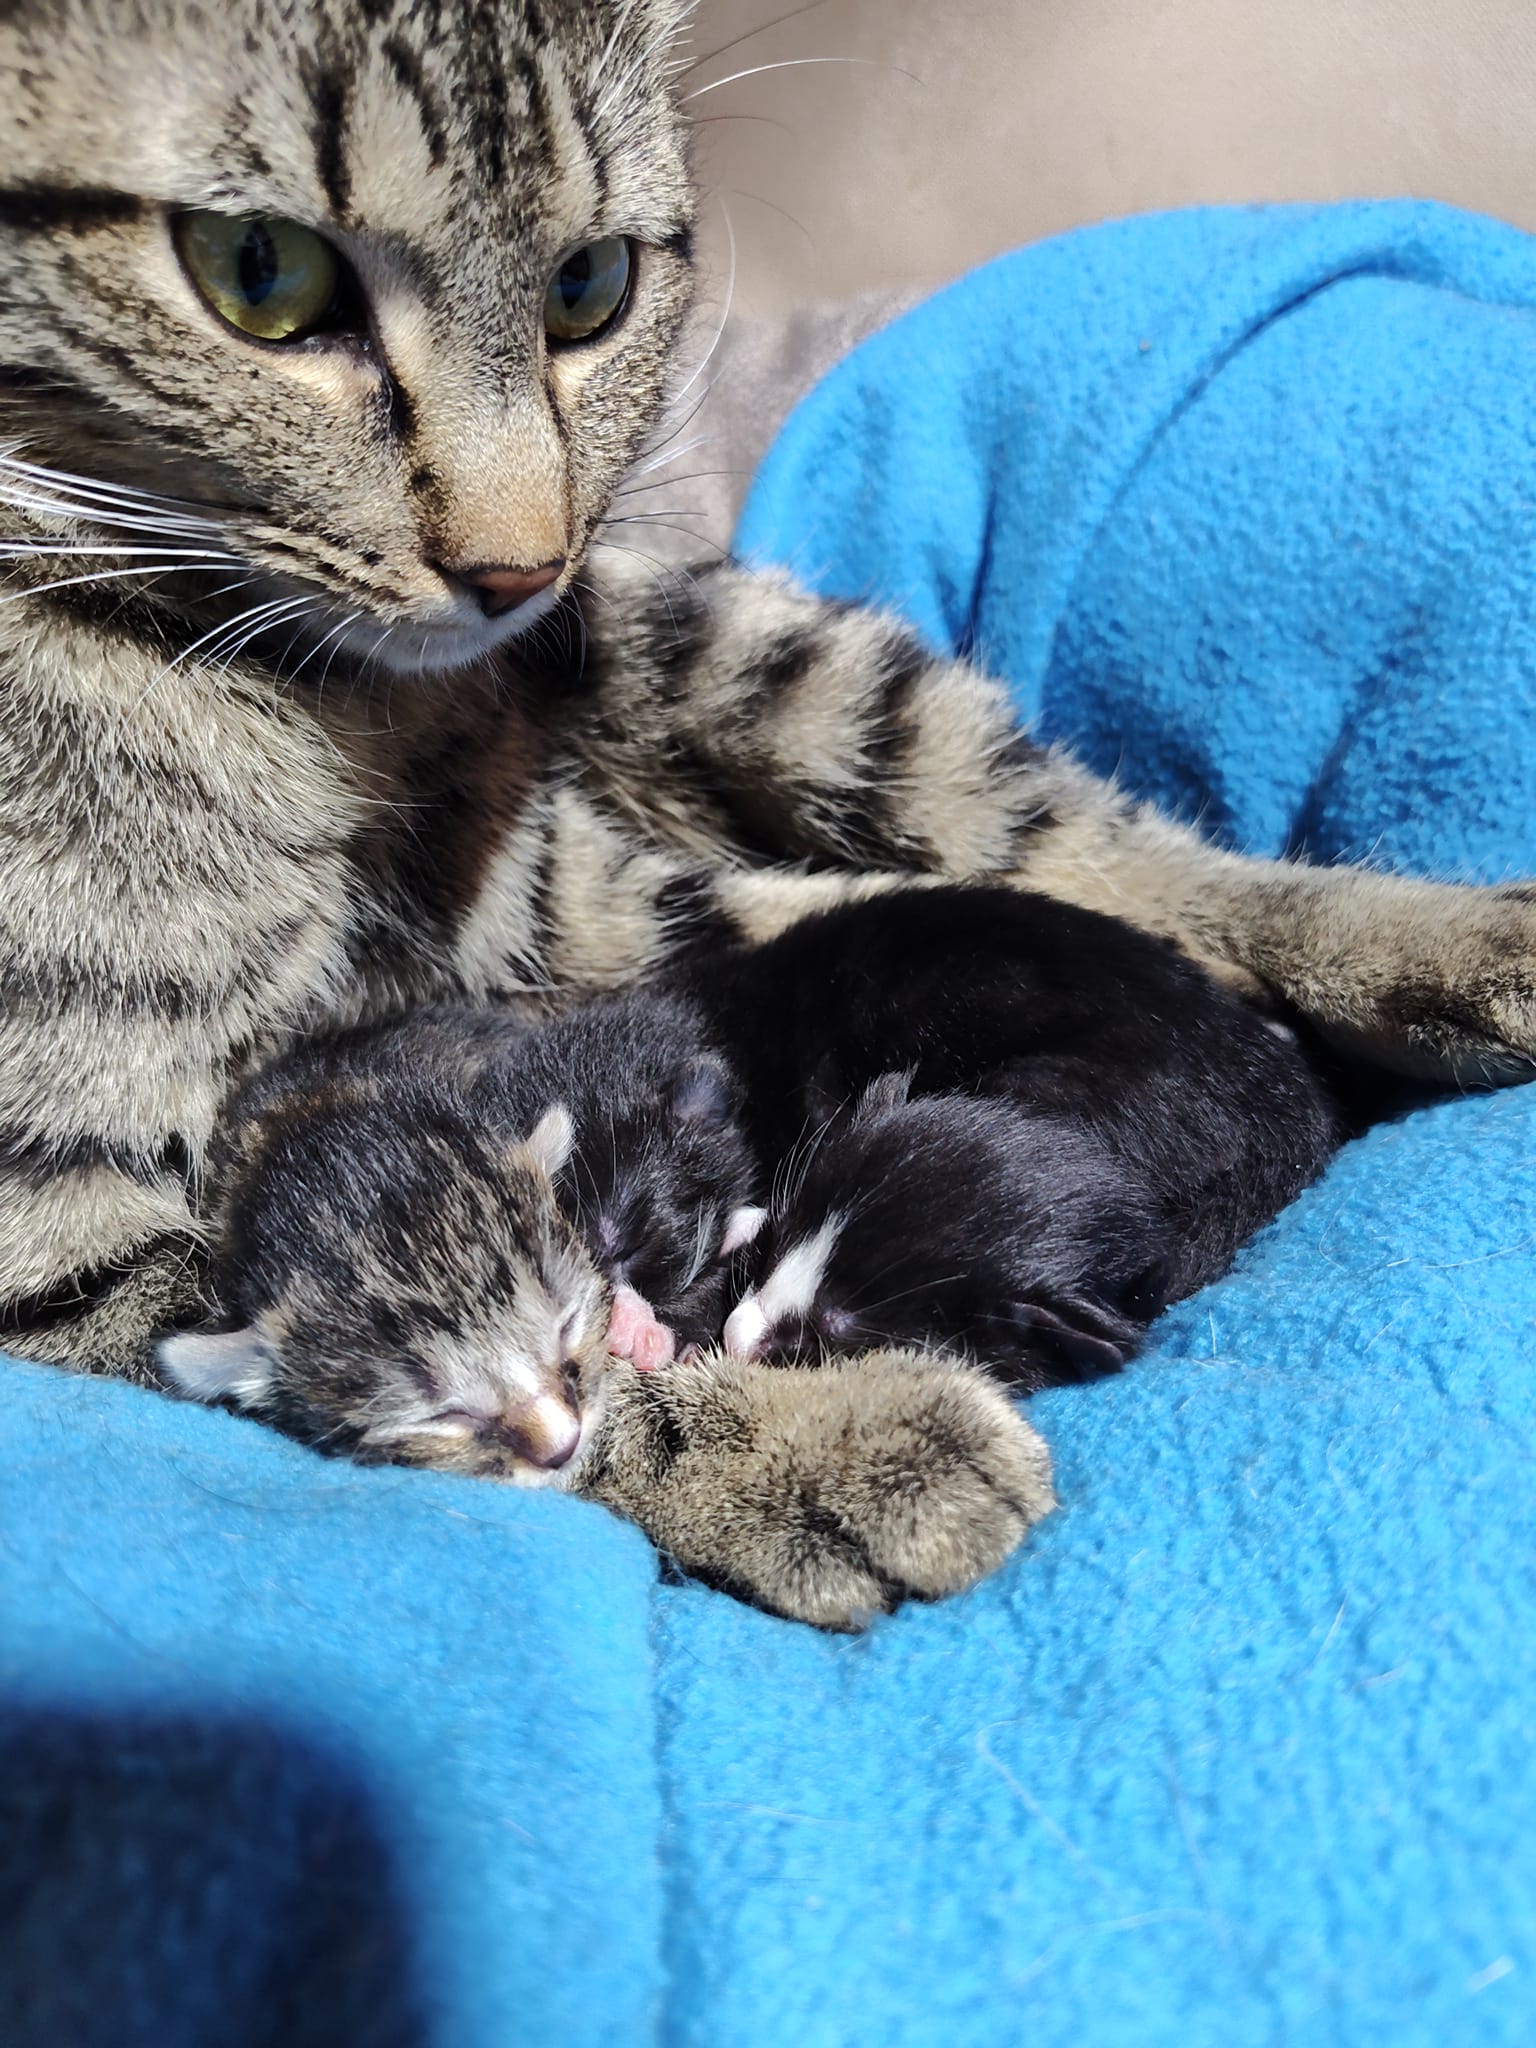 mom cat and her kittens 